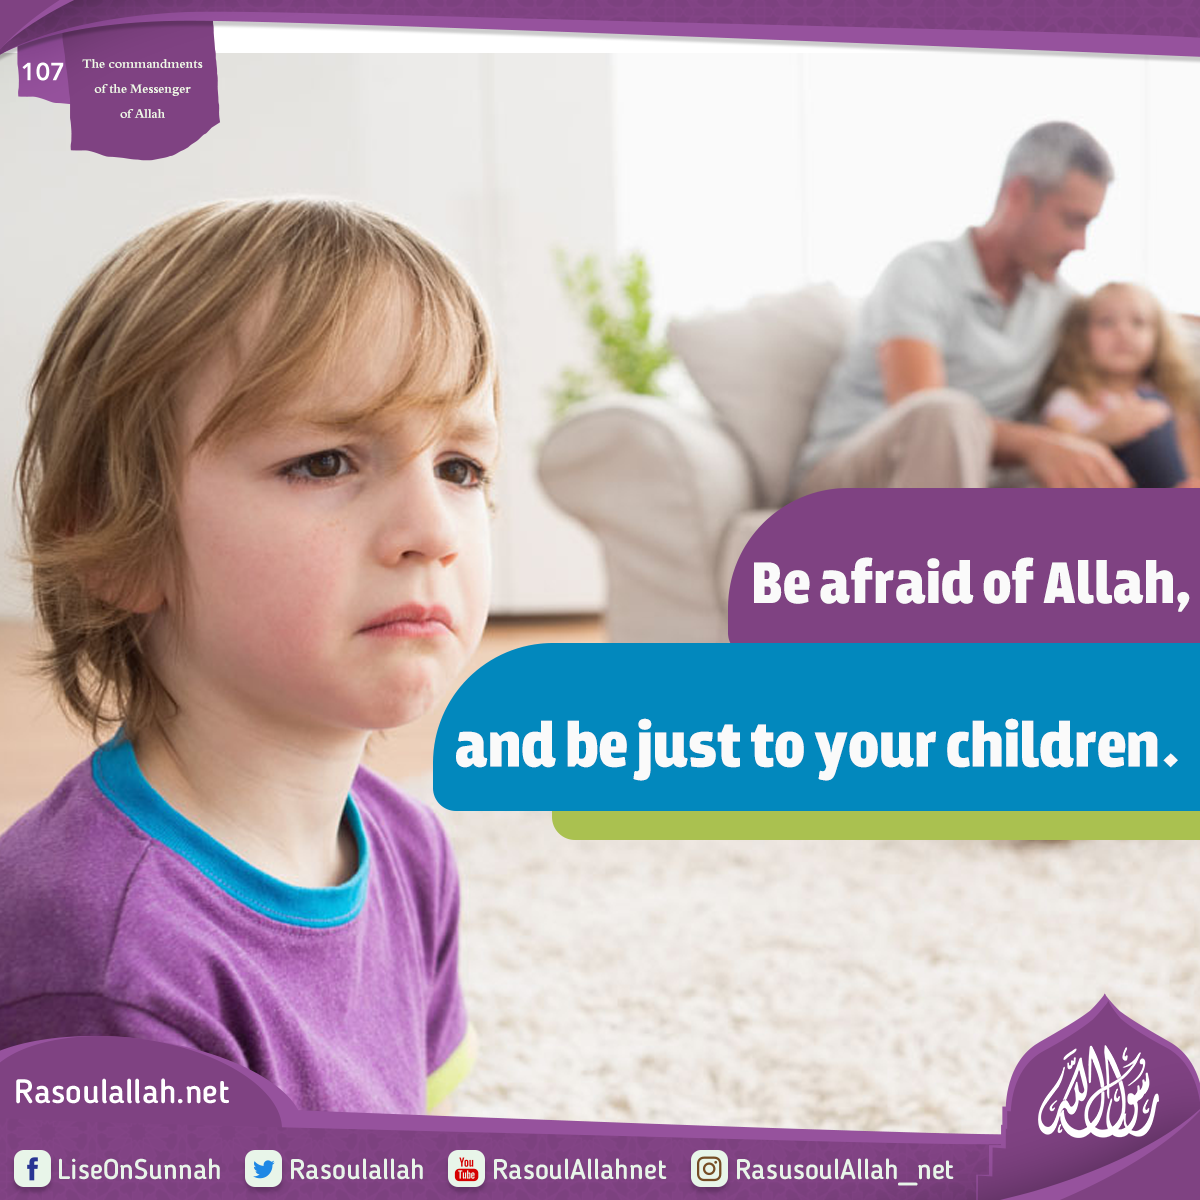 Be afraid of Allah, and be just to your children